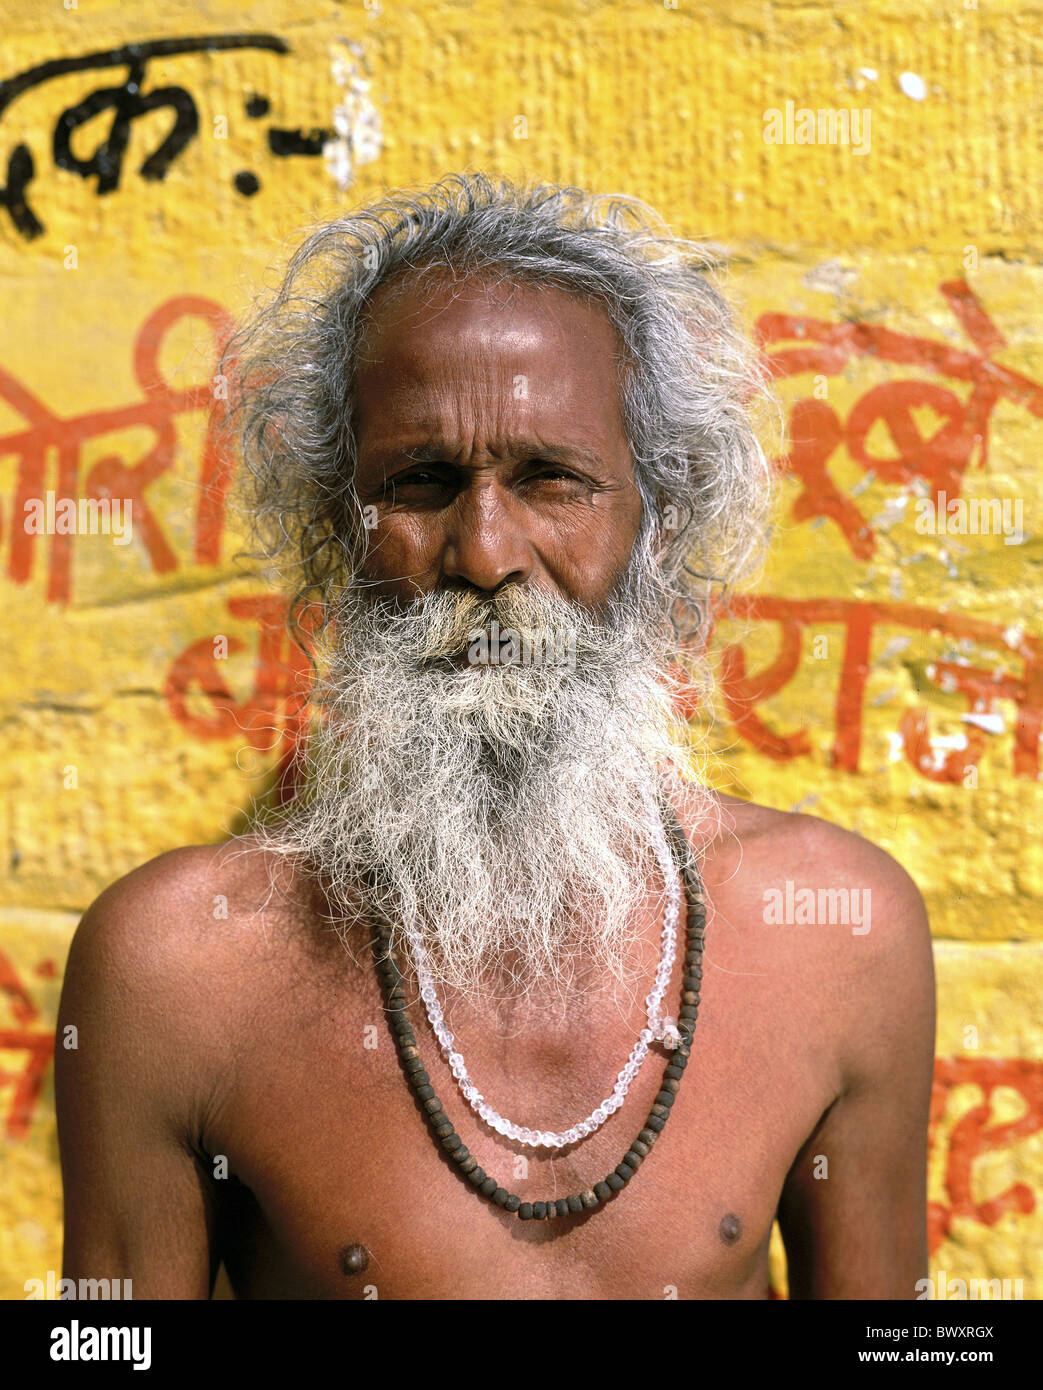 Old beard whiskers necklaces holy man India Asia person portrait white hair Stock Photo